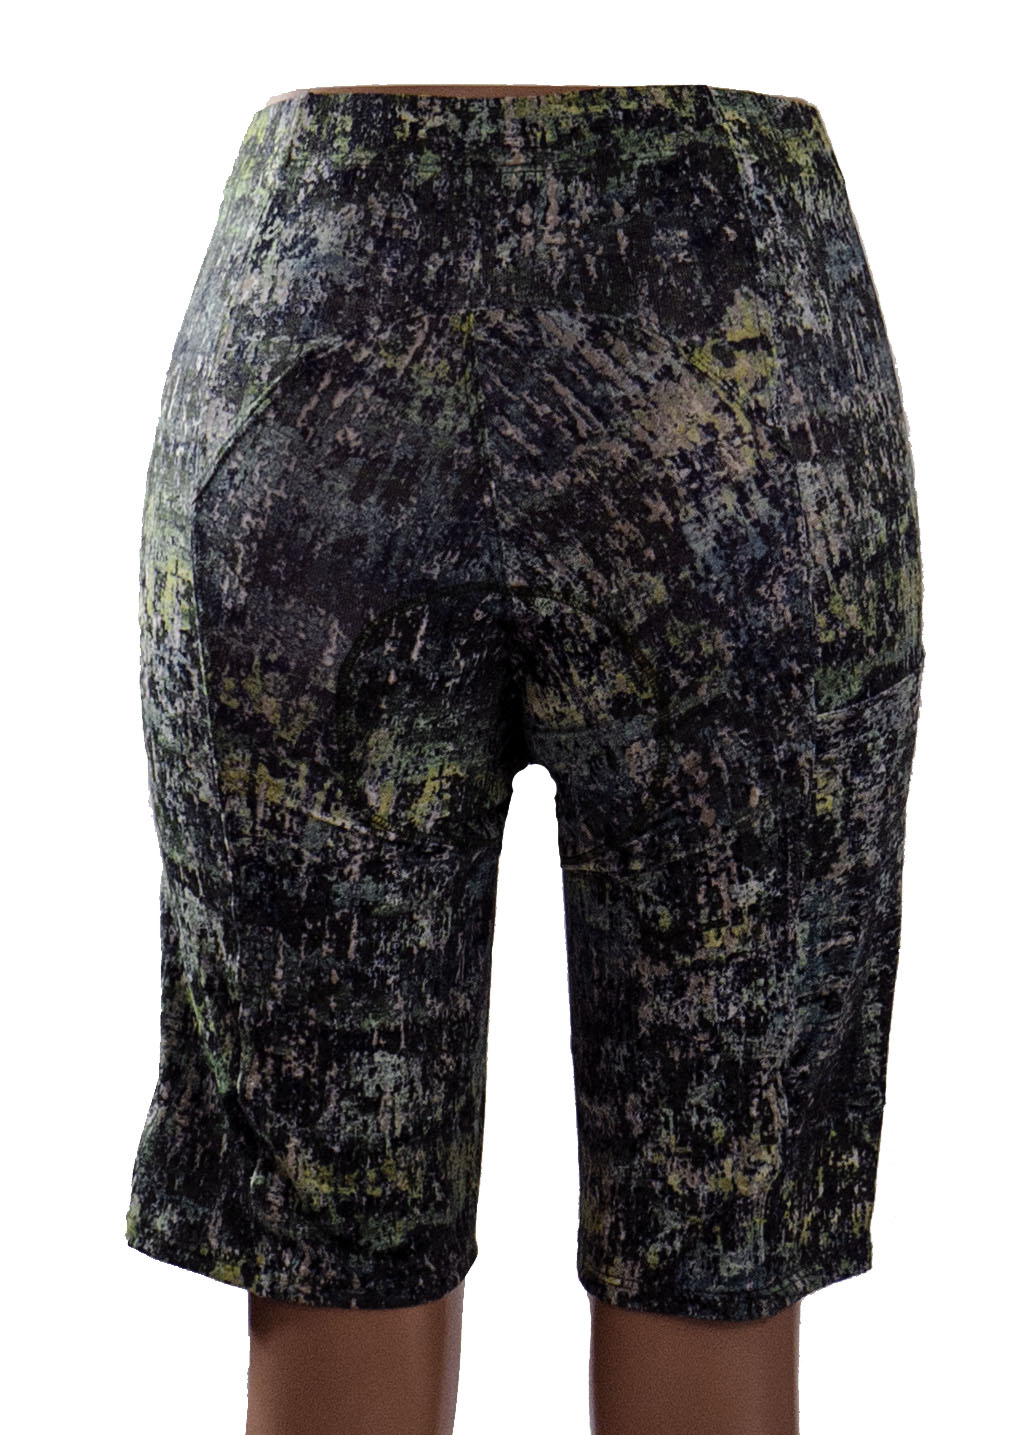 Gravel and Mountain Bike Shorts Forest